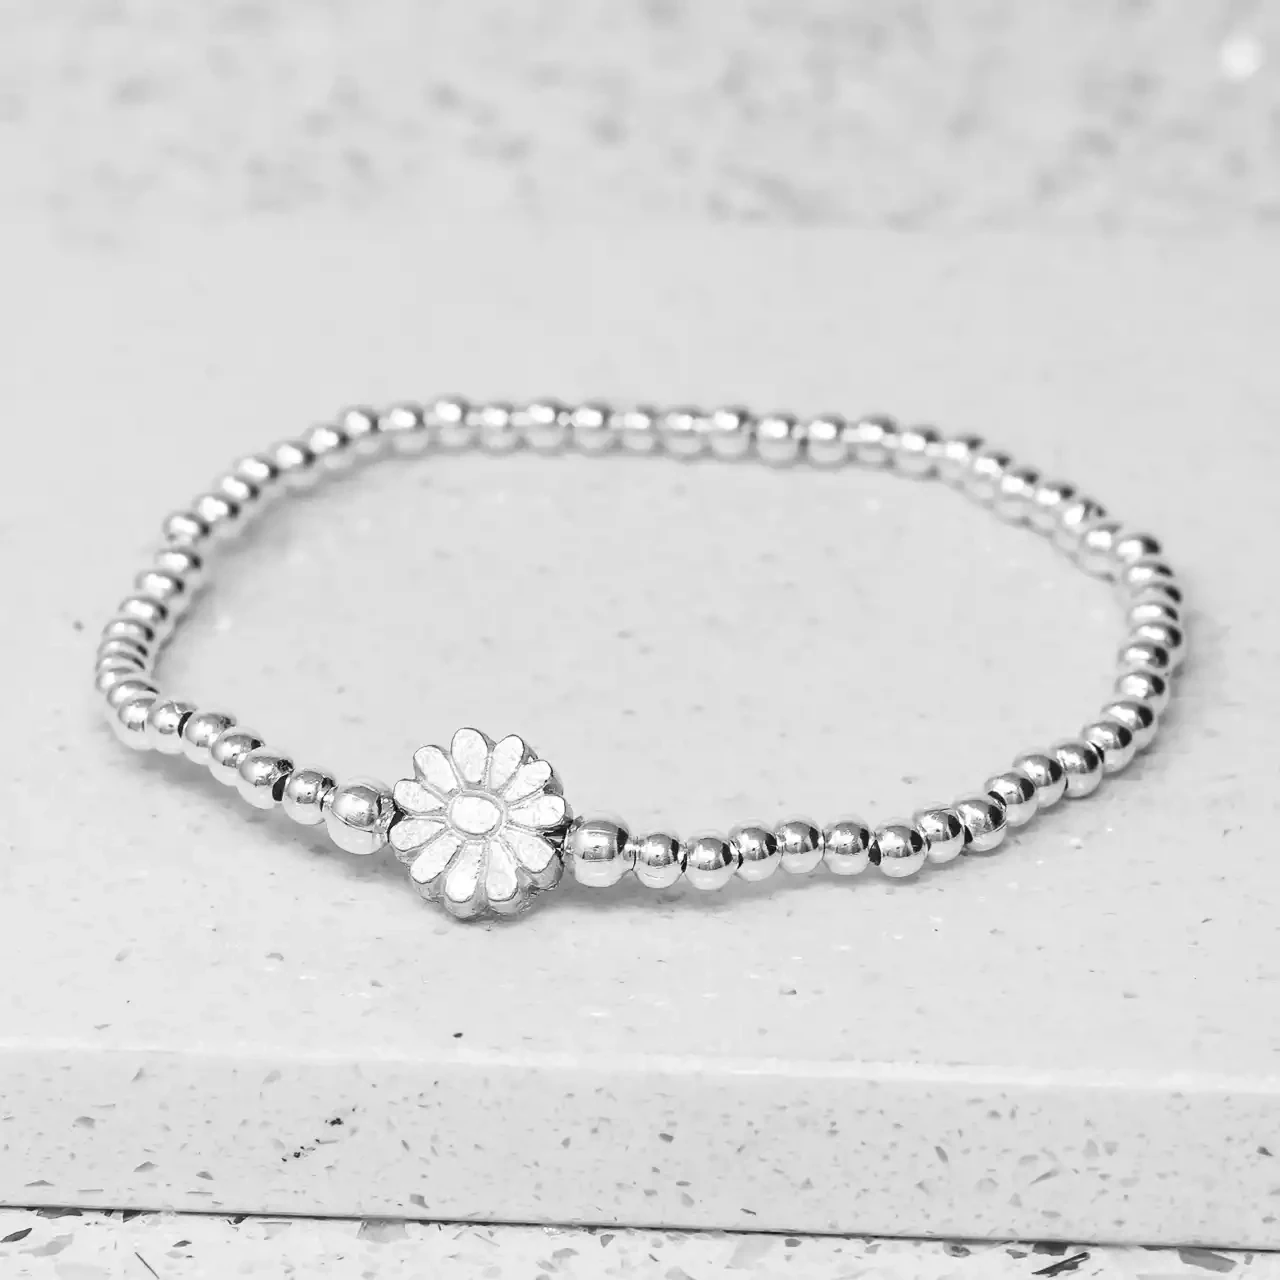 Seed Bead Bracelet With Pewter Daisy Charm - Fabulous Friends by Metal Planet